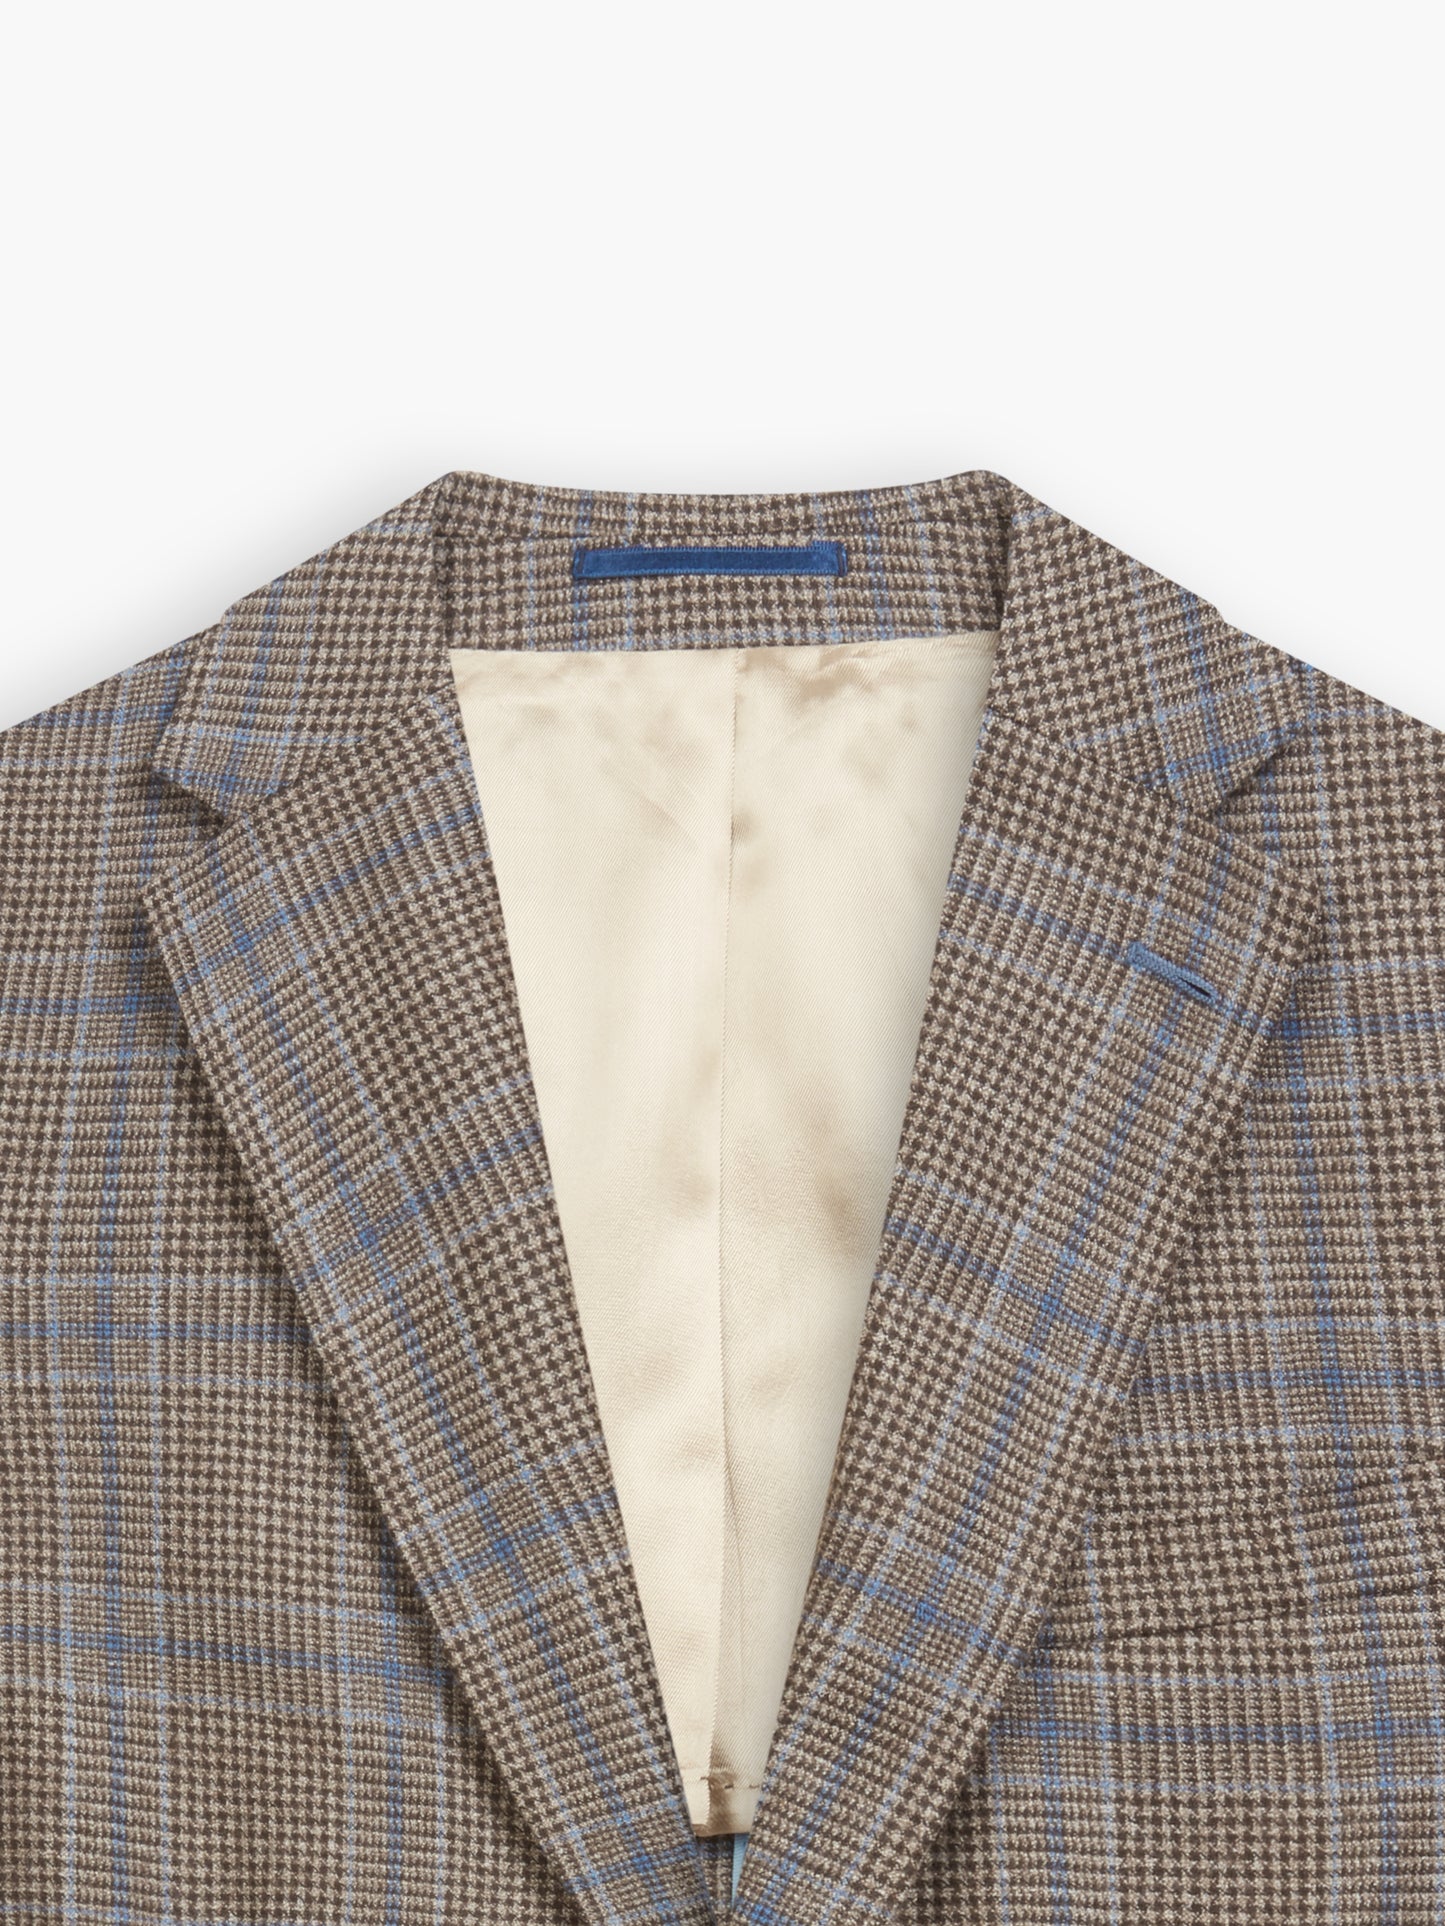 Maiden Slim Fit Blue And Brown Glencheck Jacket